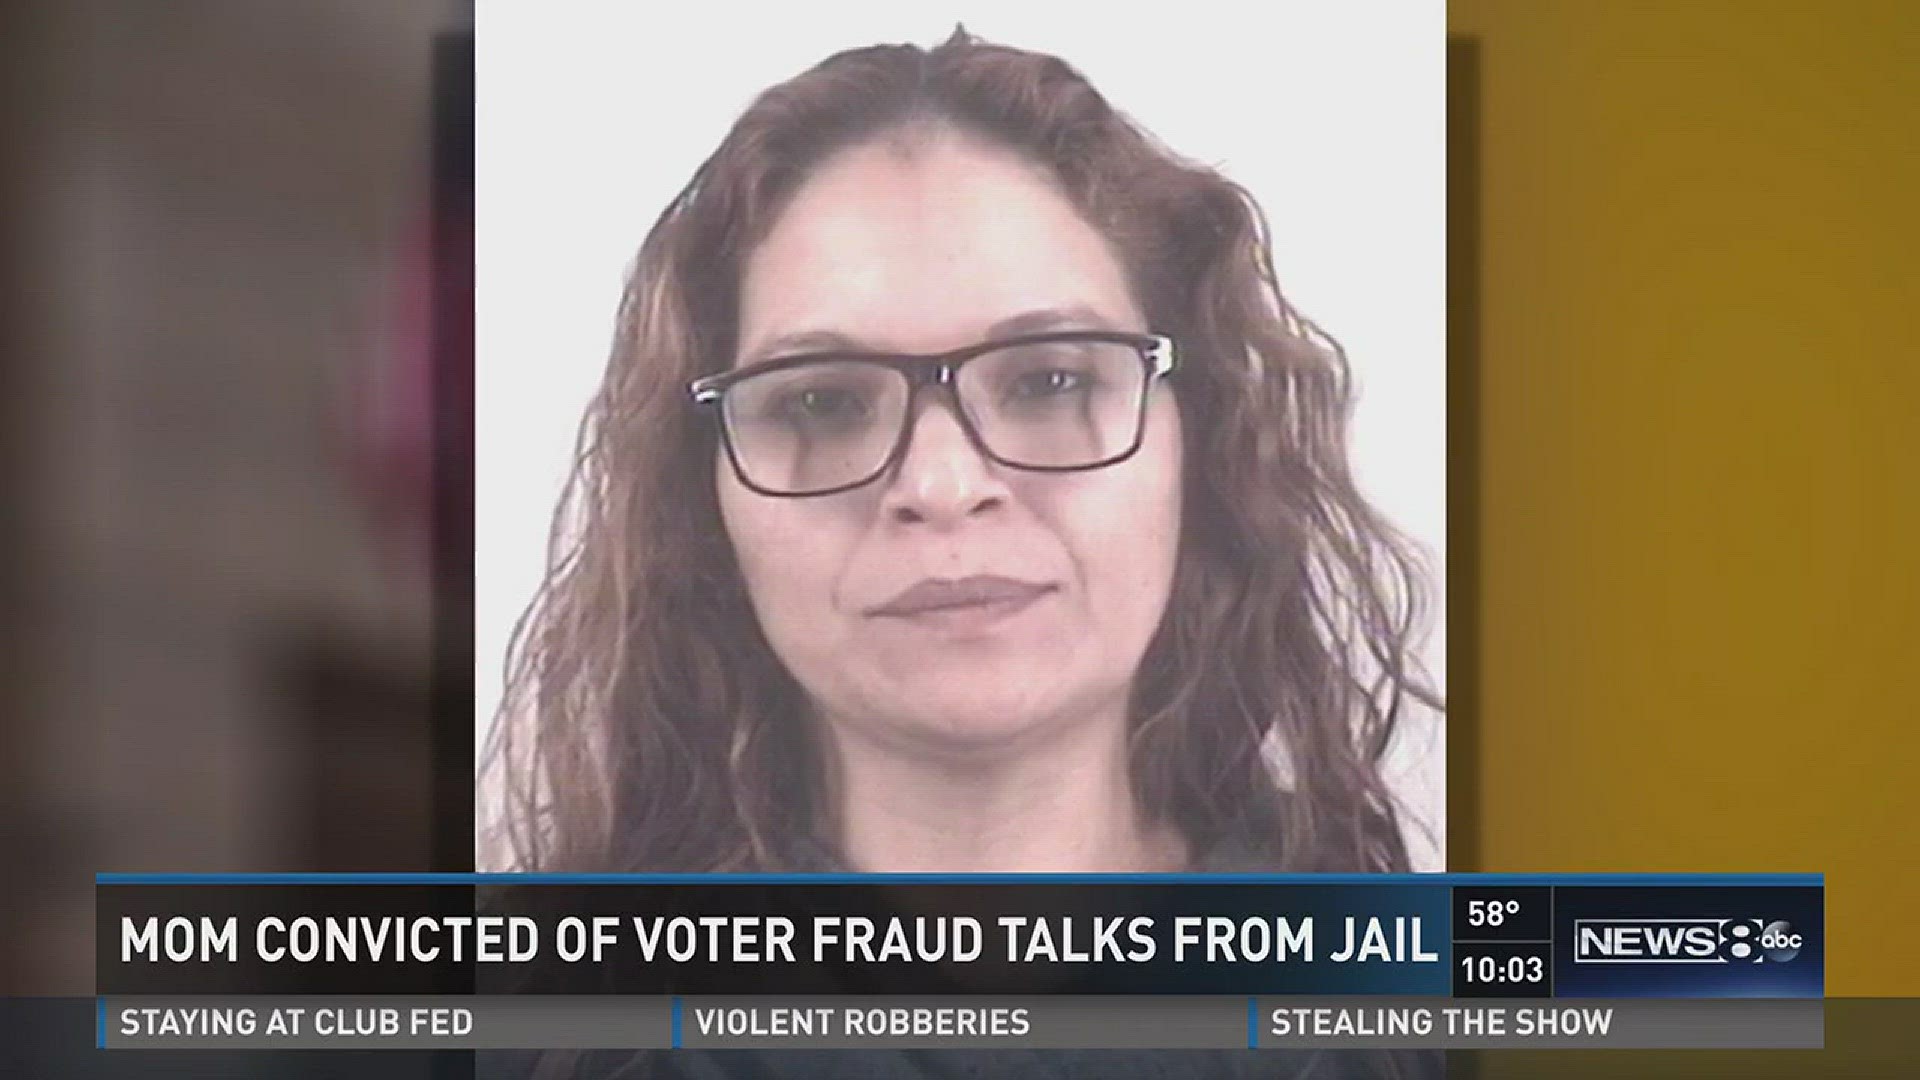 Mom convicted of voter fraud talks from jail